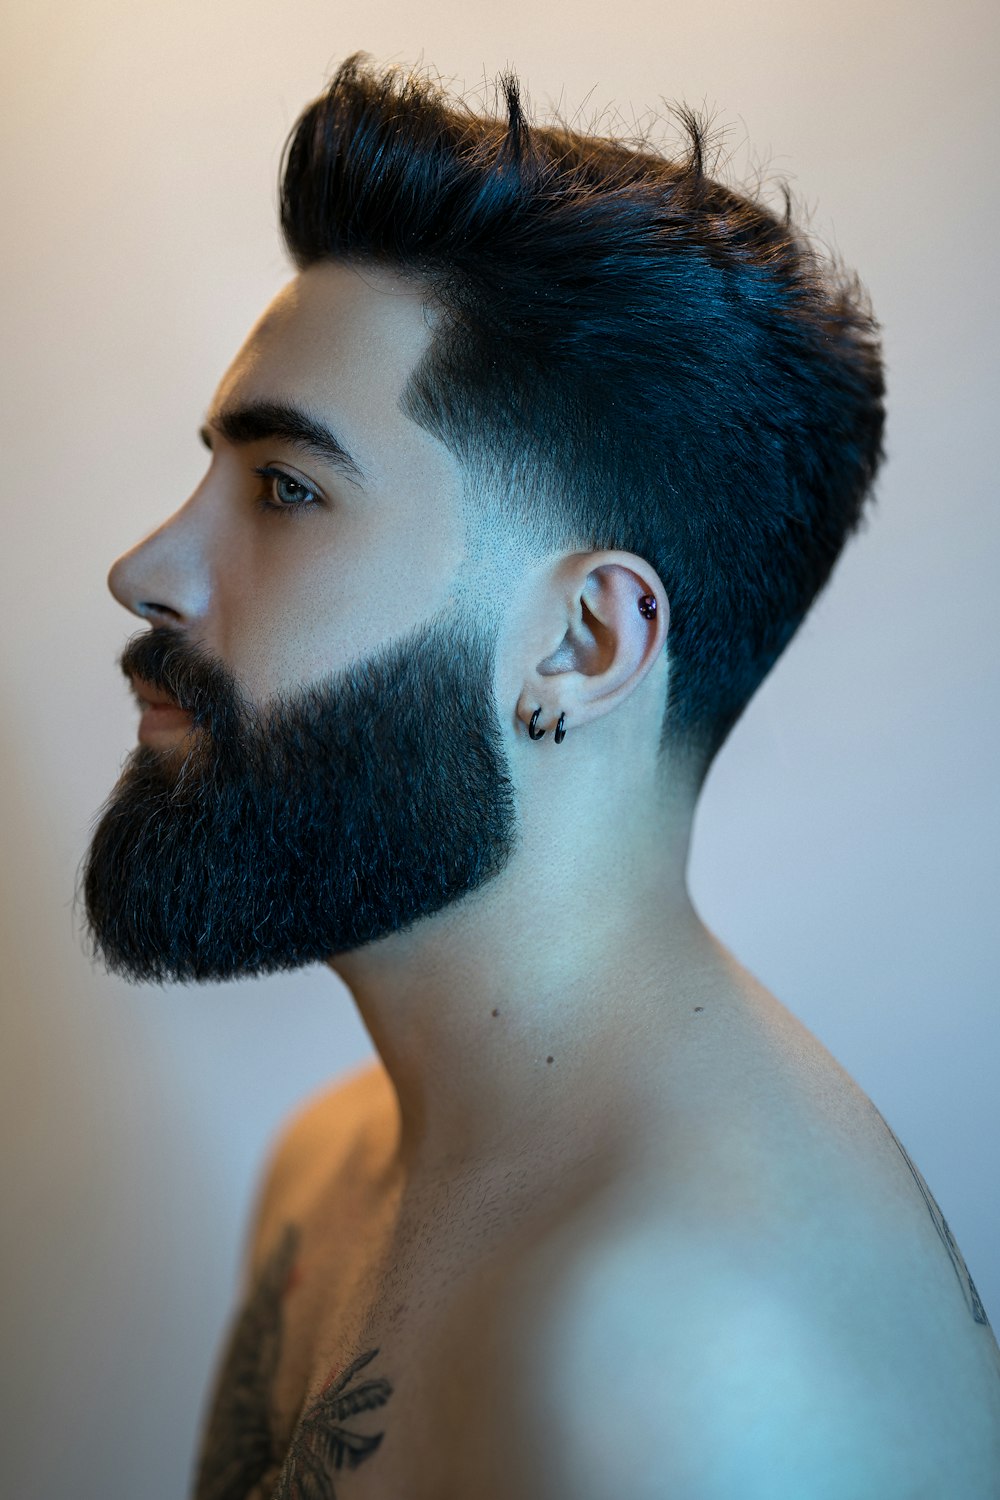 Hairstyles For Men Pictures | Download Free Images on Unsplash